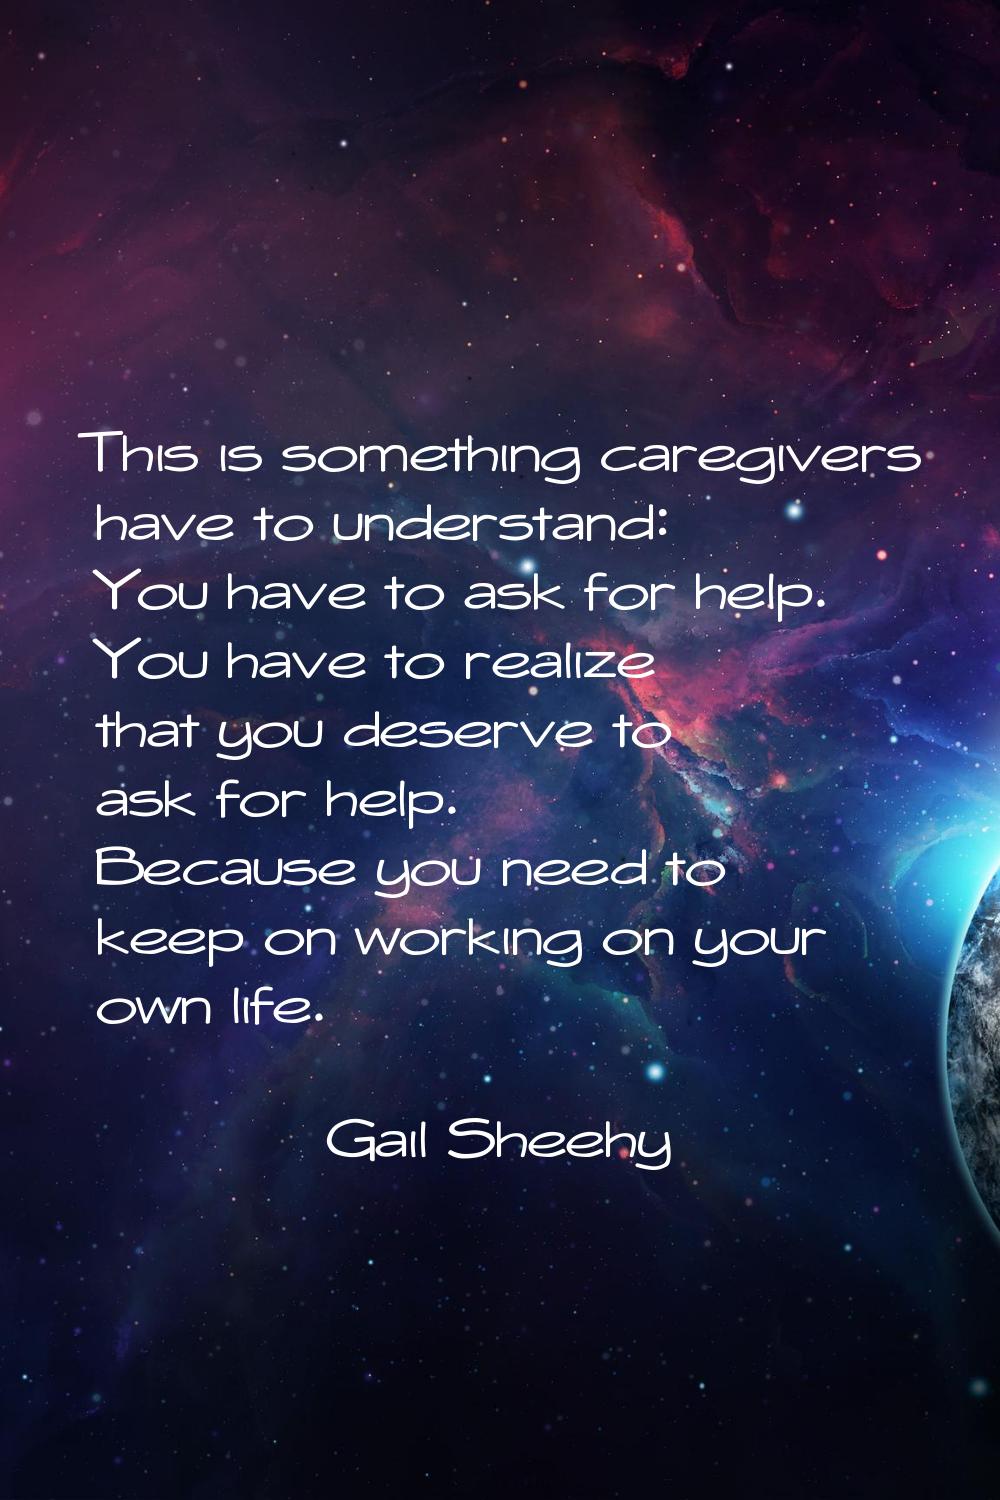 This is something caregivers have to understand: You have to ask for help. You have to realize that